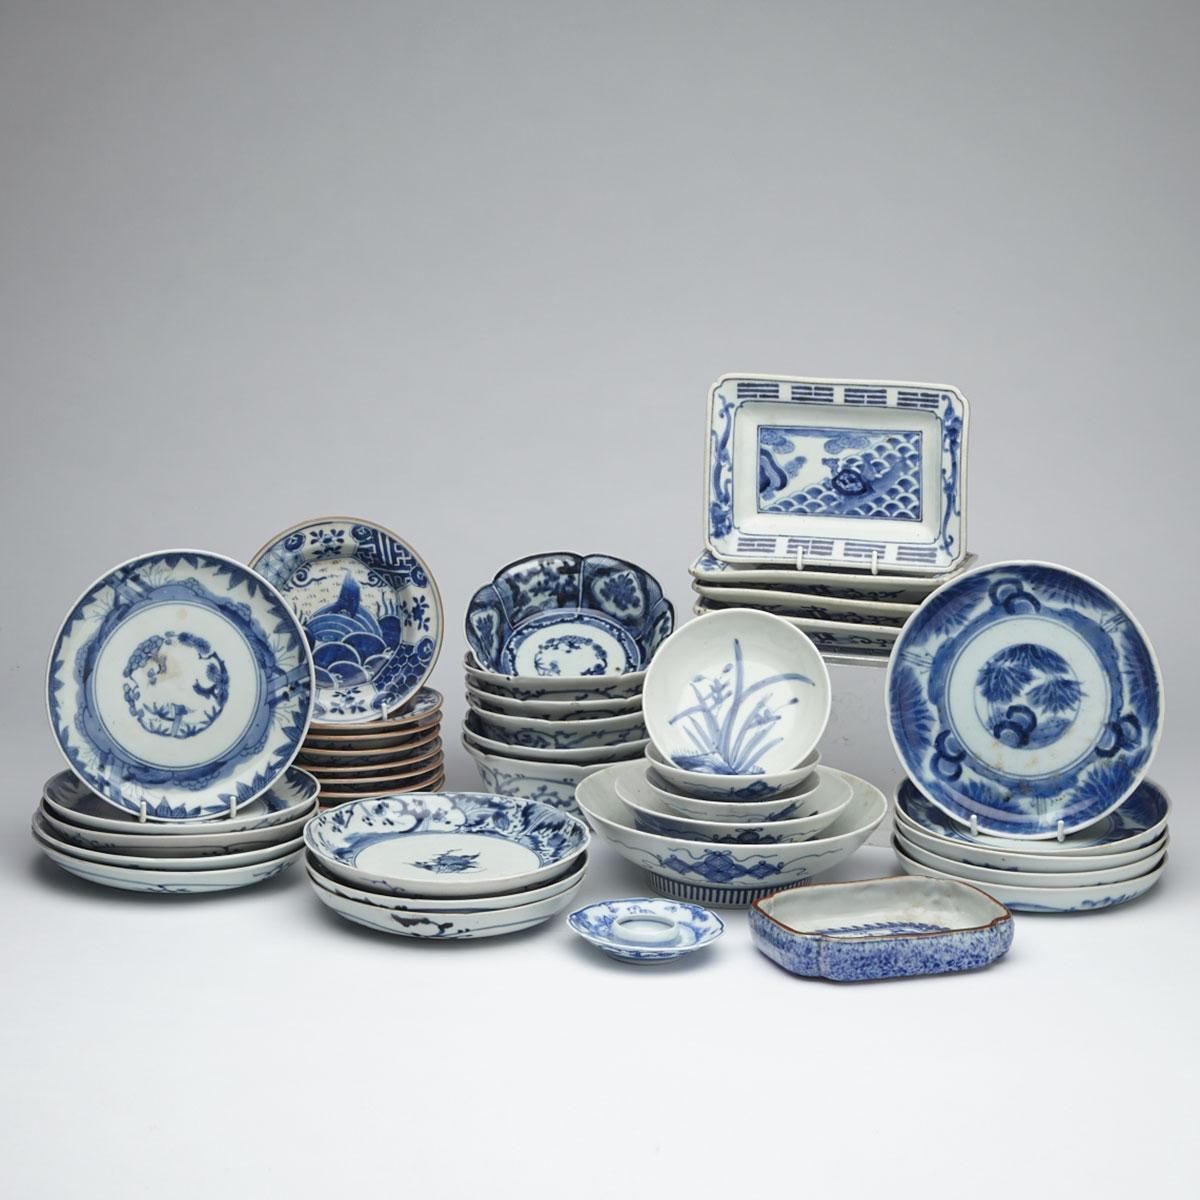 Group of 38 Japanese Blue and White Porcelain Dishes 